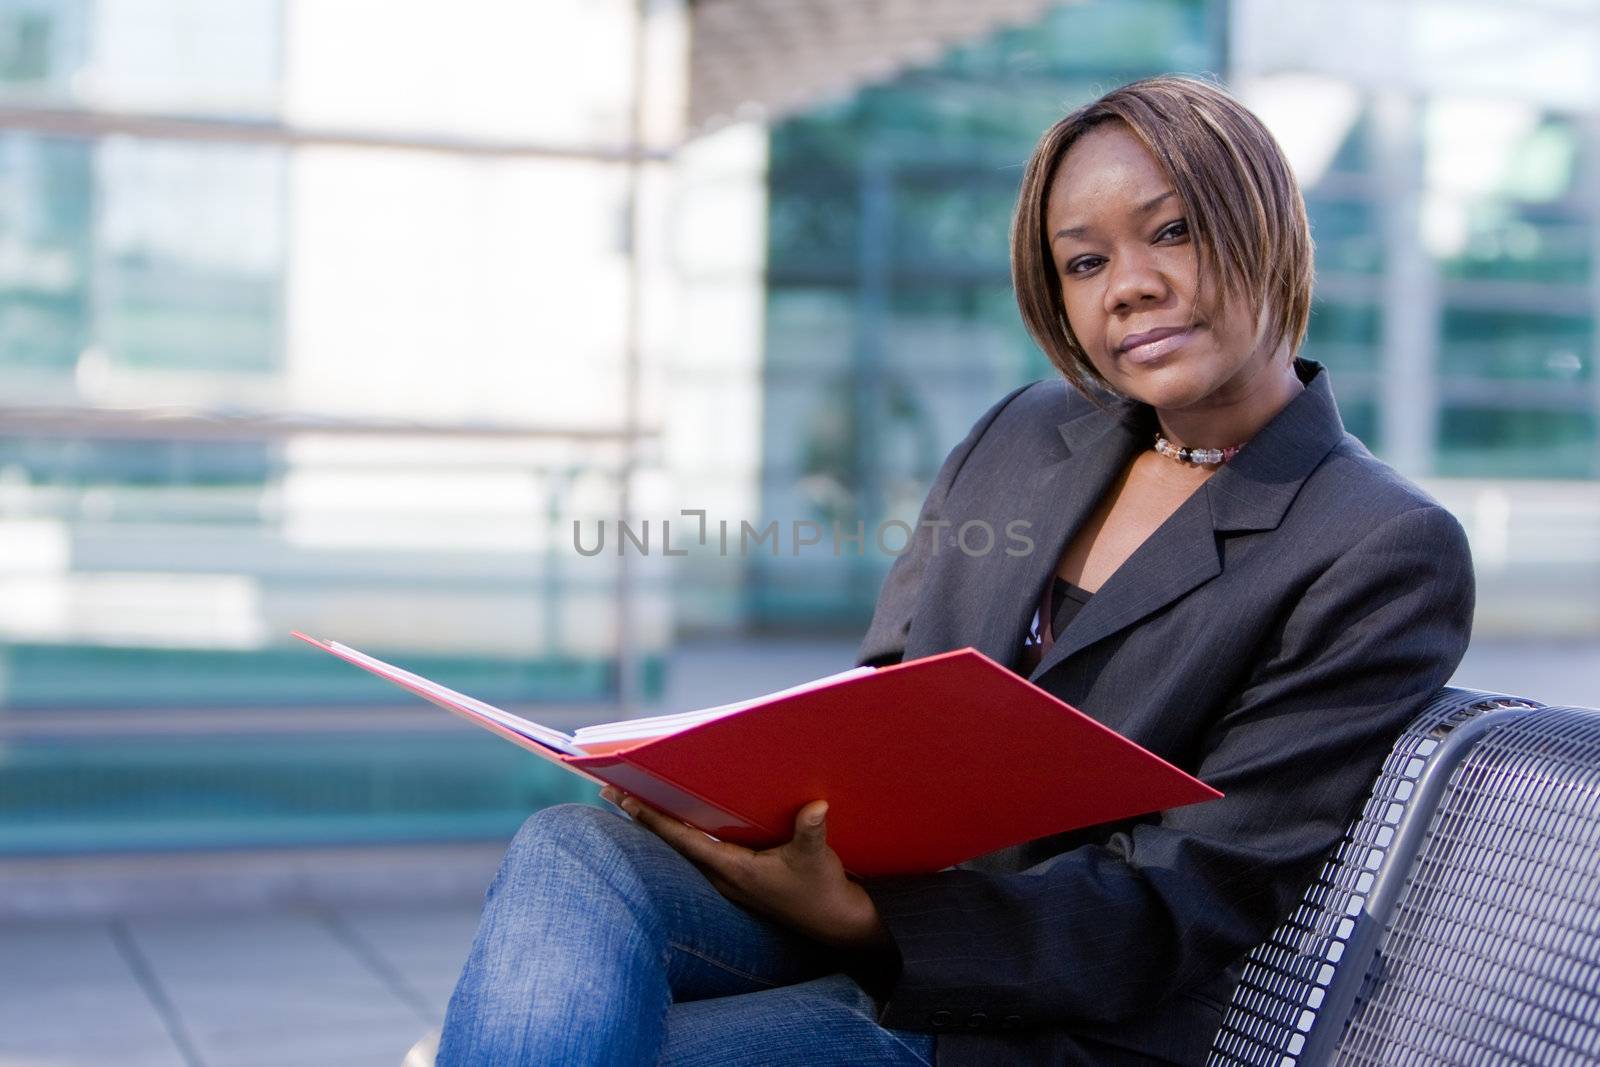 African american business woman reading documents in a folder in front of an office building